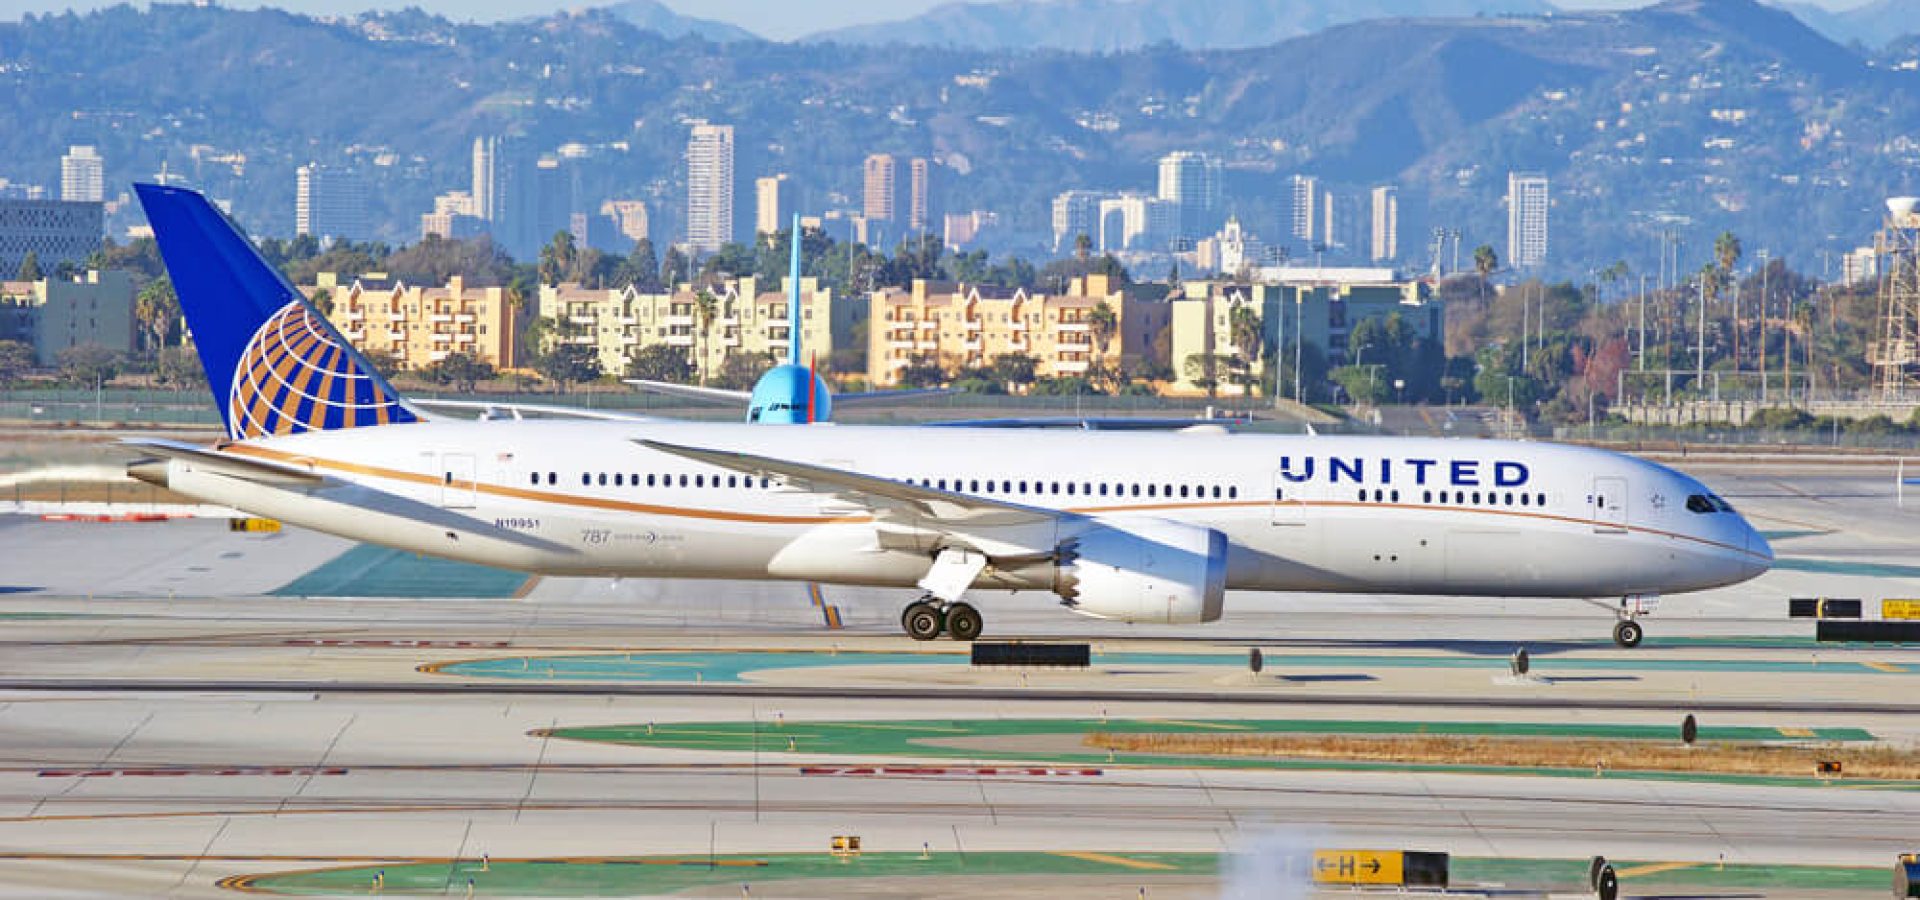 United Airlines Boeing 787-9 Dreamliner taxiing along the runway.